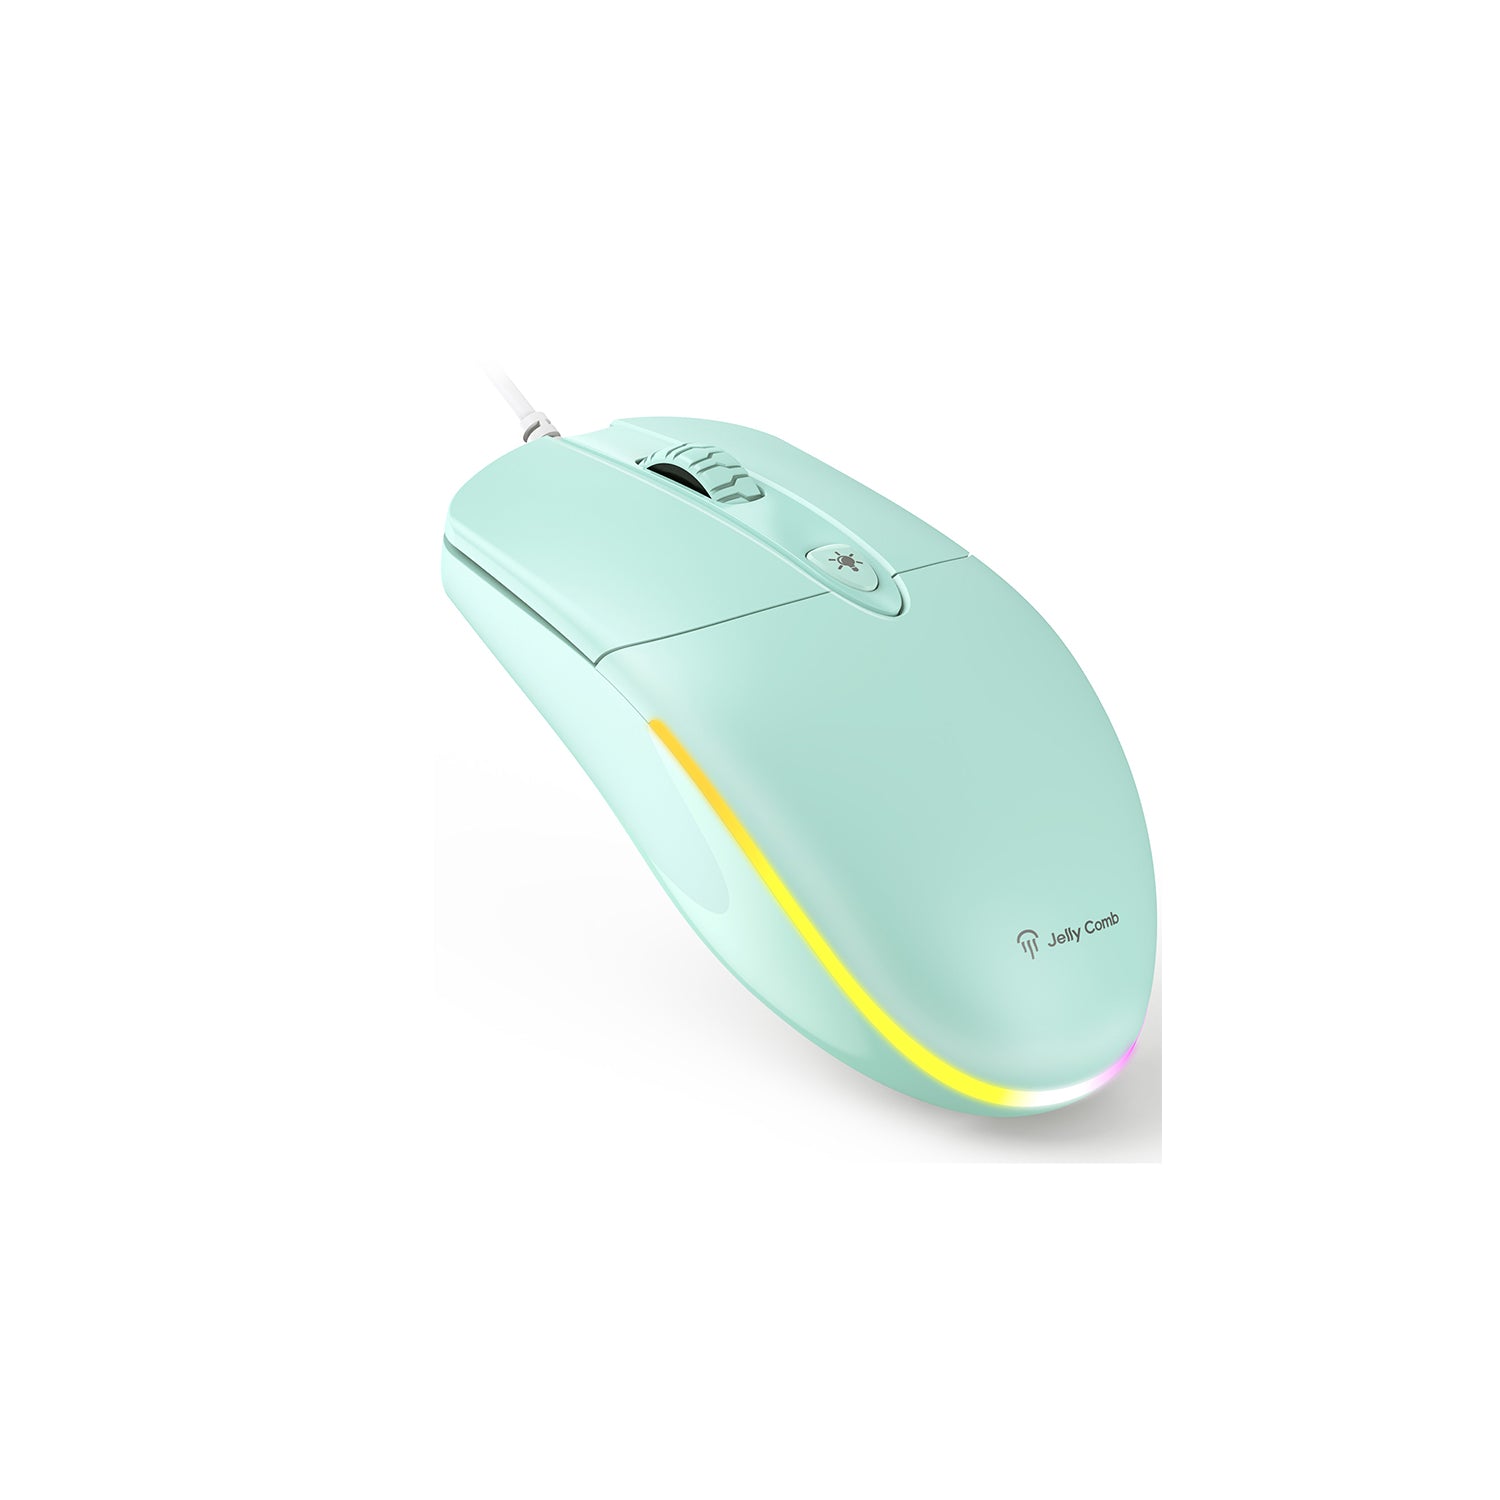 MS059 RGB Wired Mouse